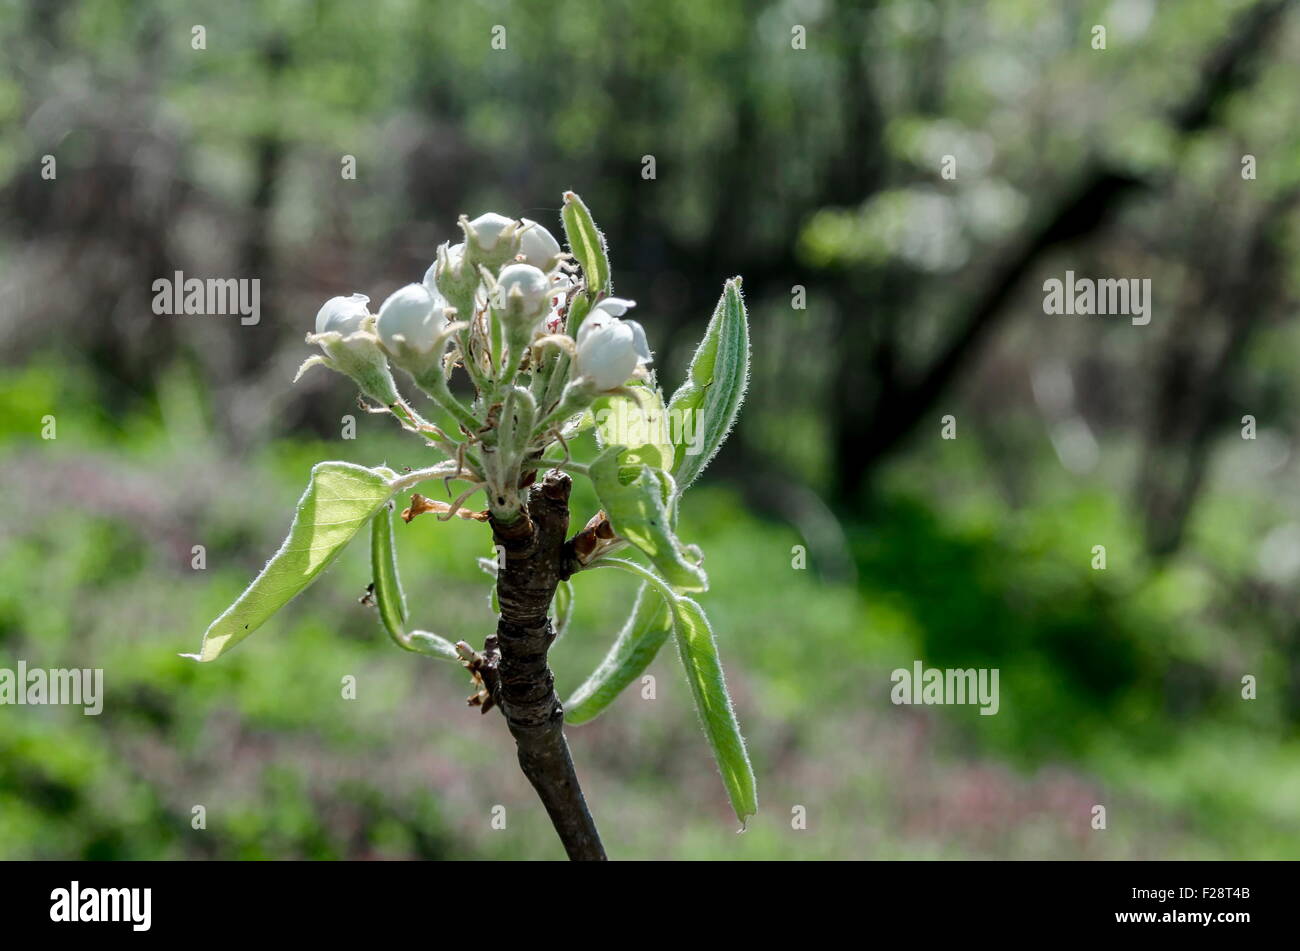 Small apple tree blossom in spring, small town yard, Bulgaria Stock Photo